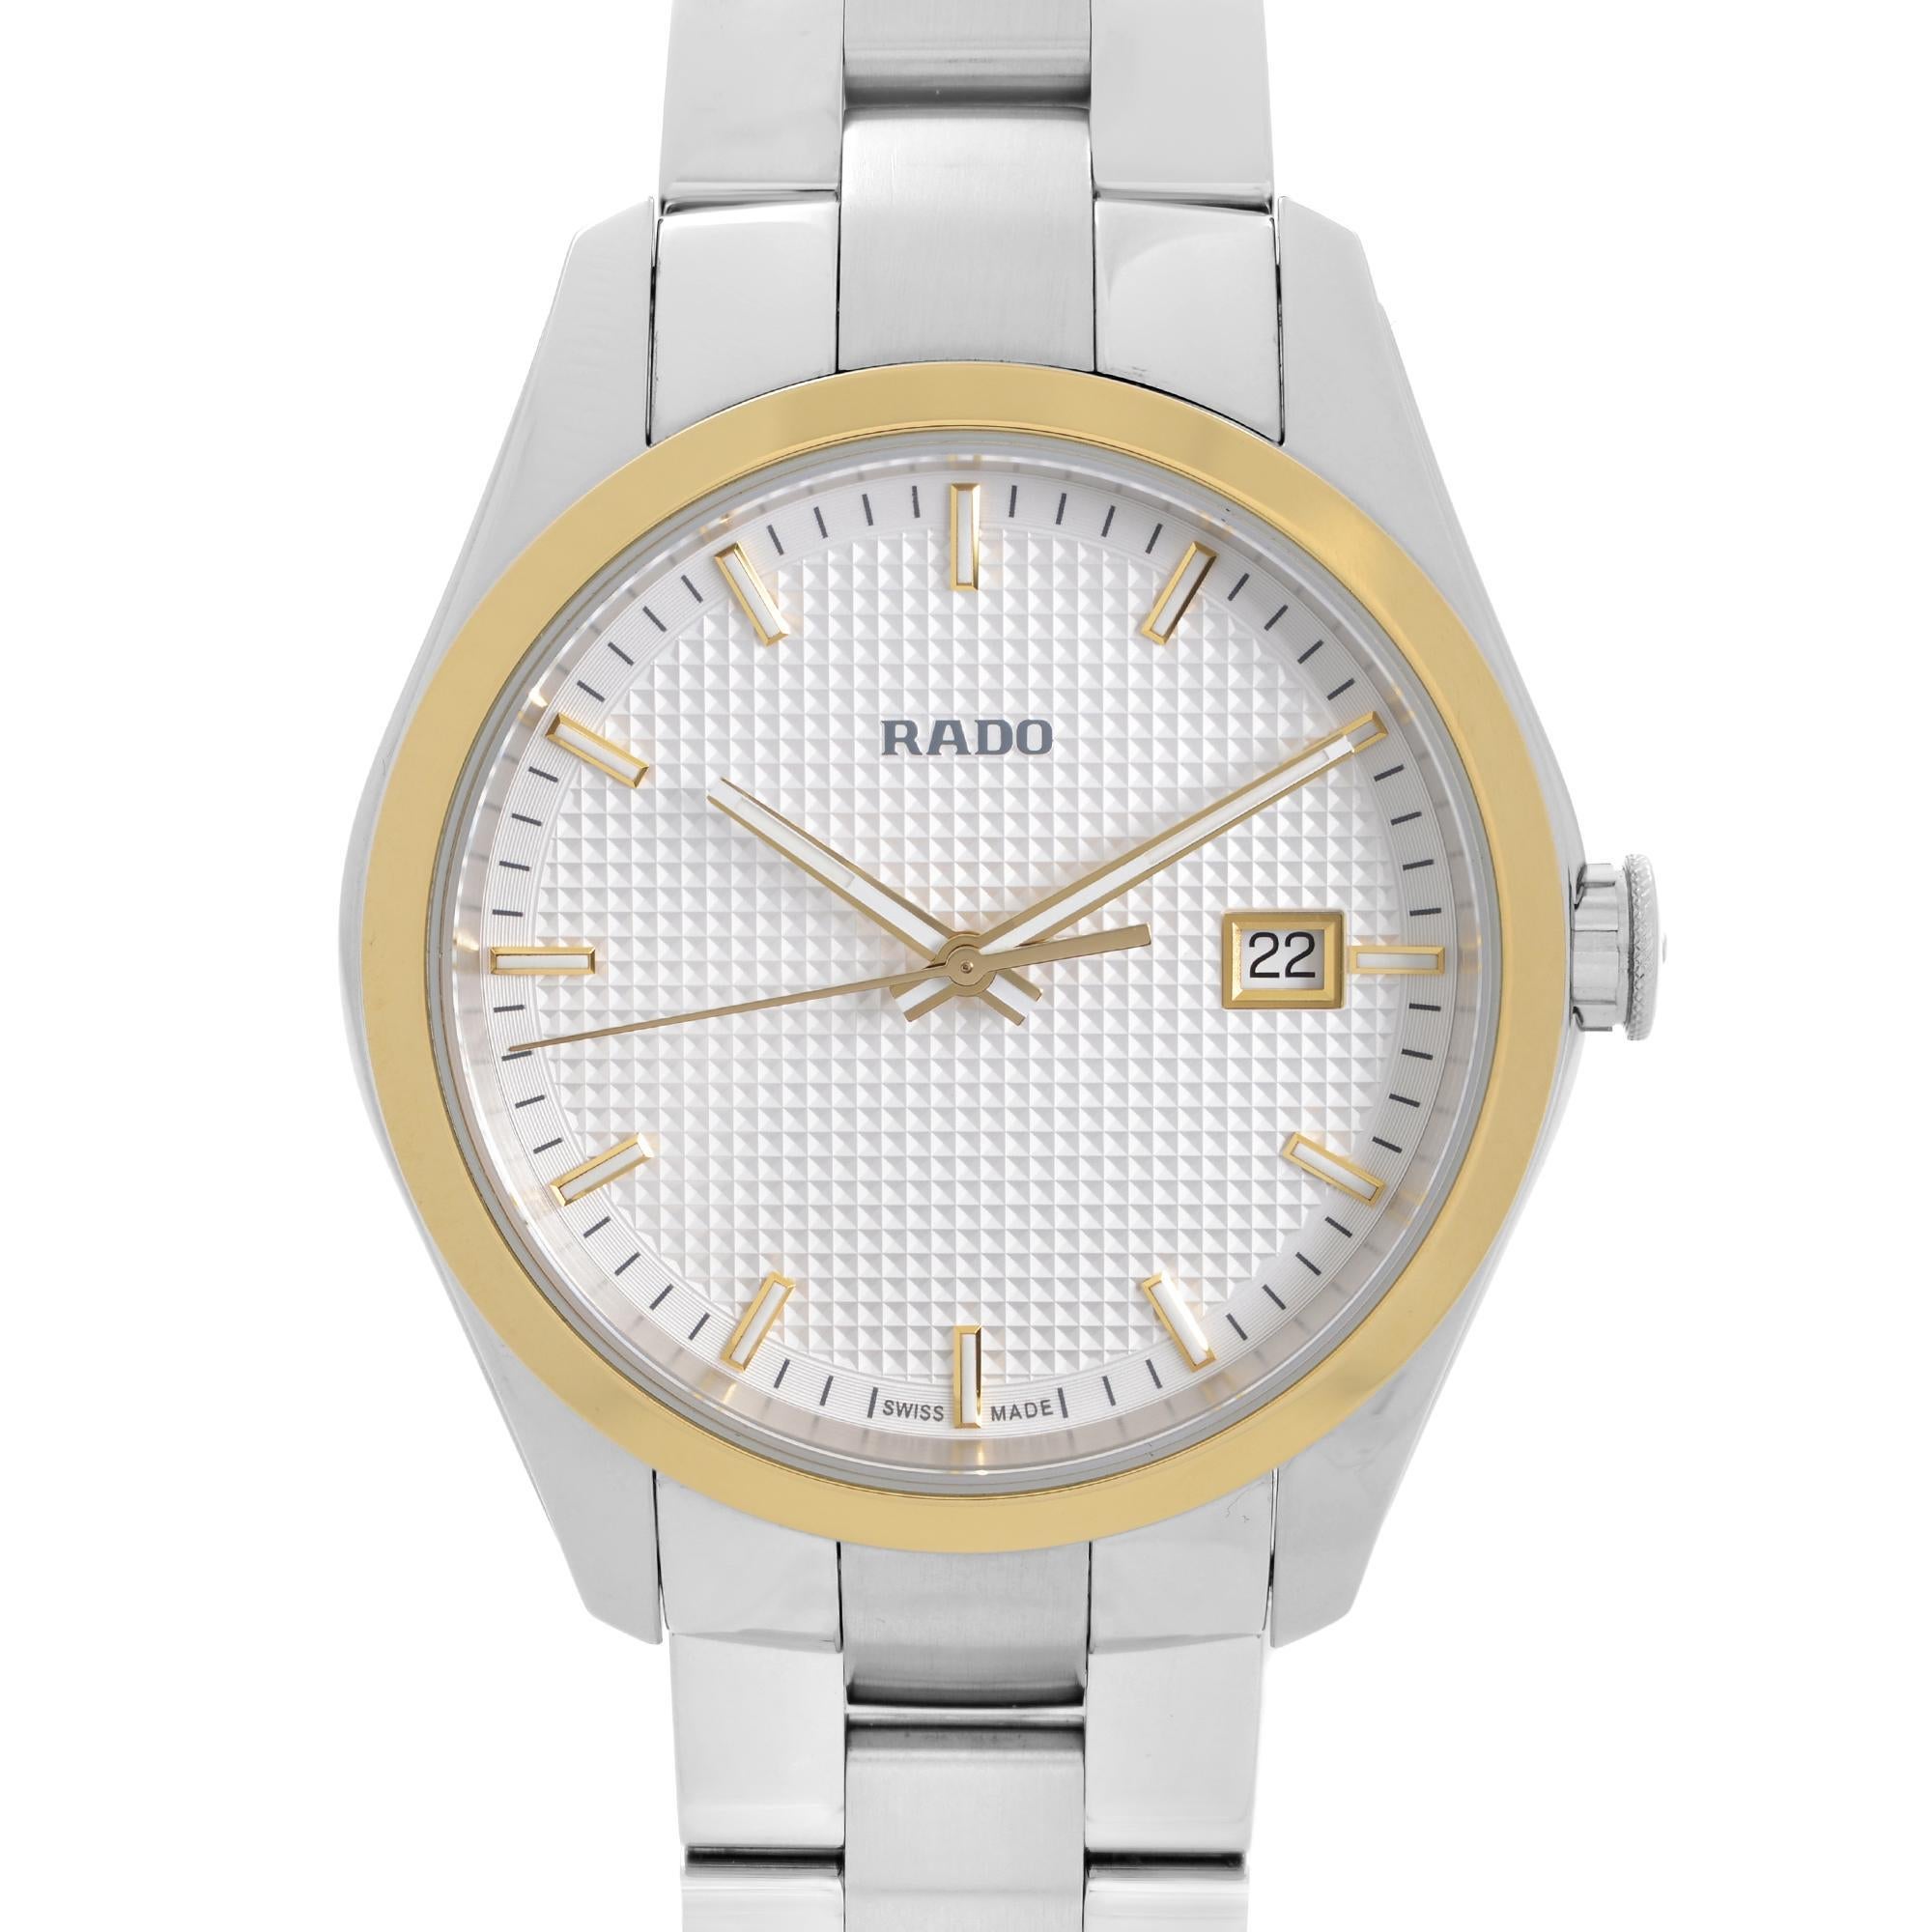 Display Model Rado Hyperchrome Men's Watch R32188123. This Timepiece is Powered by a Quartz (Battery) Movement and Features: Ceramos (Hi-Tech Ceramic & Metal Composite) Case and Bracelet, Fixed Gold-Tone Bezel, Silver Dial with Gold-Tone Hands and